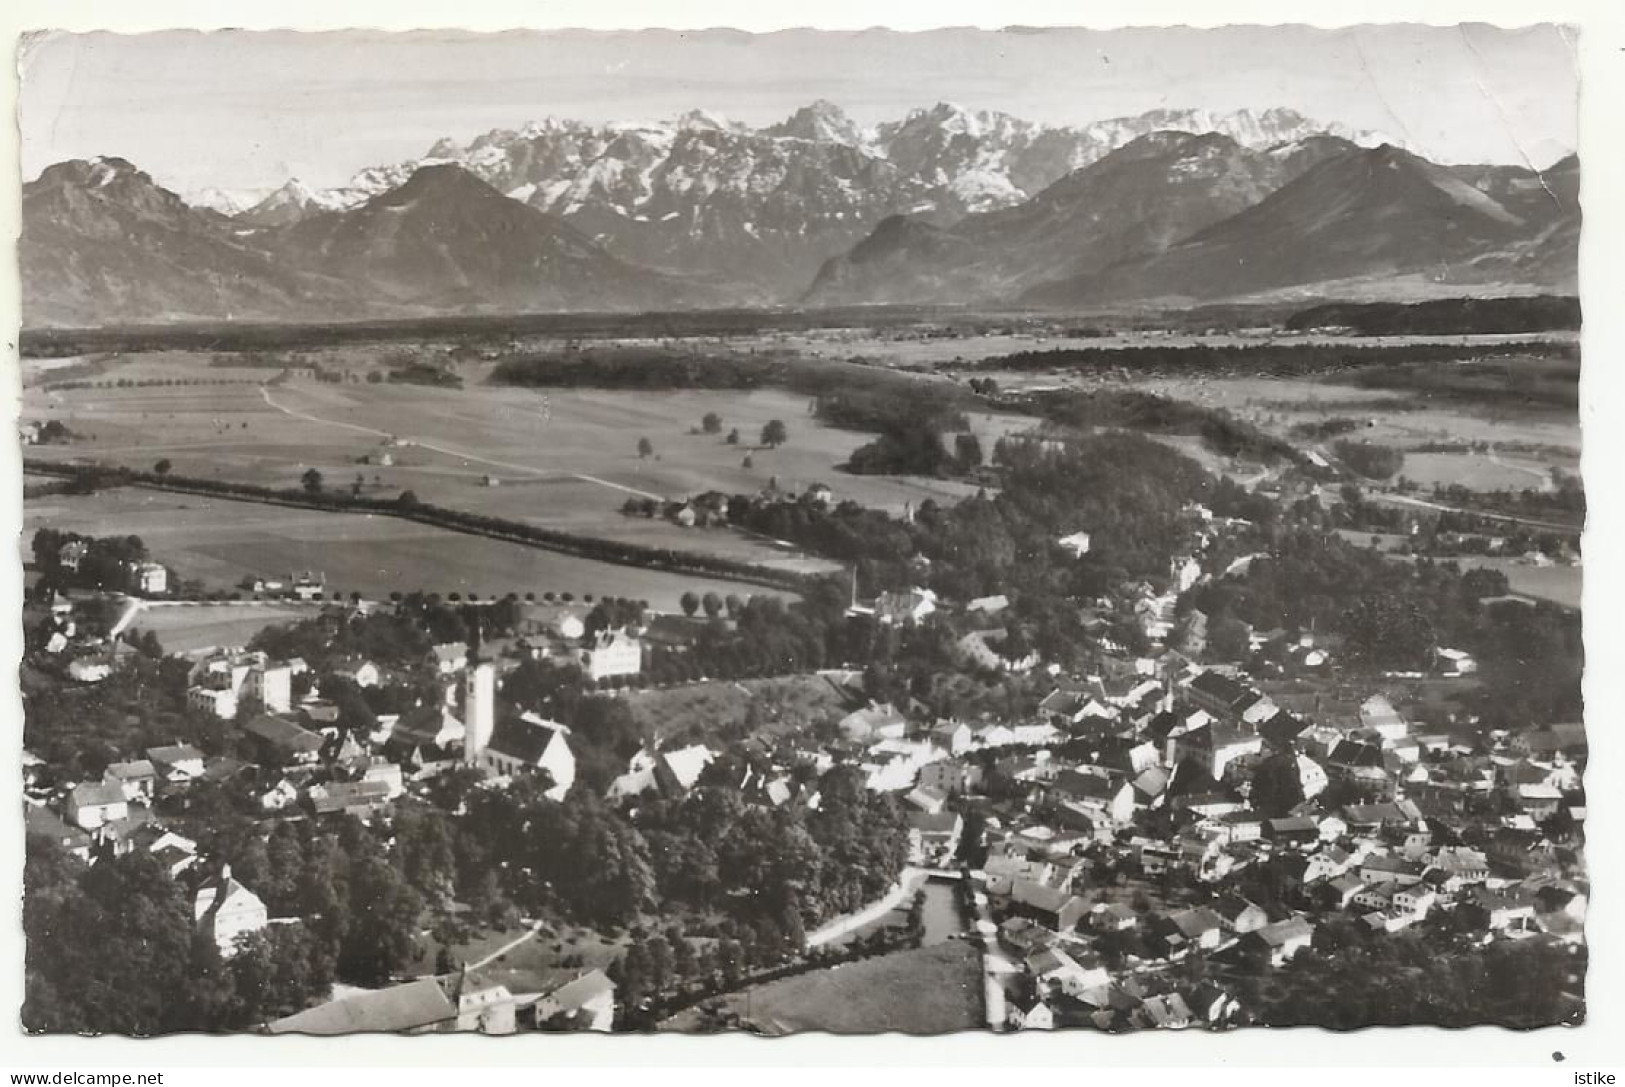 Germany, Moorbad Aibling, Aerial View, Good Stamp, Special Hand Canc., 1955. - Bad Aibling